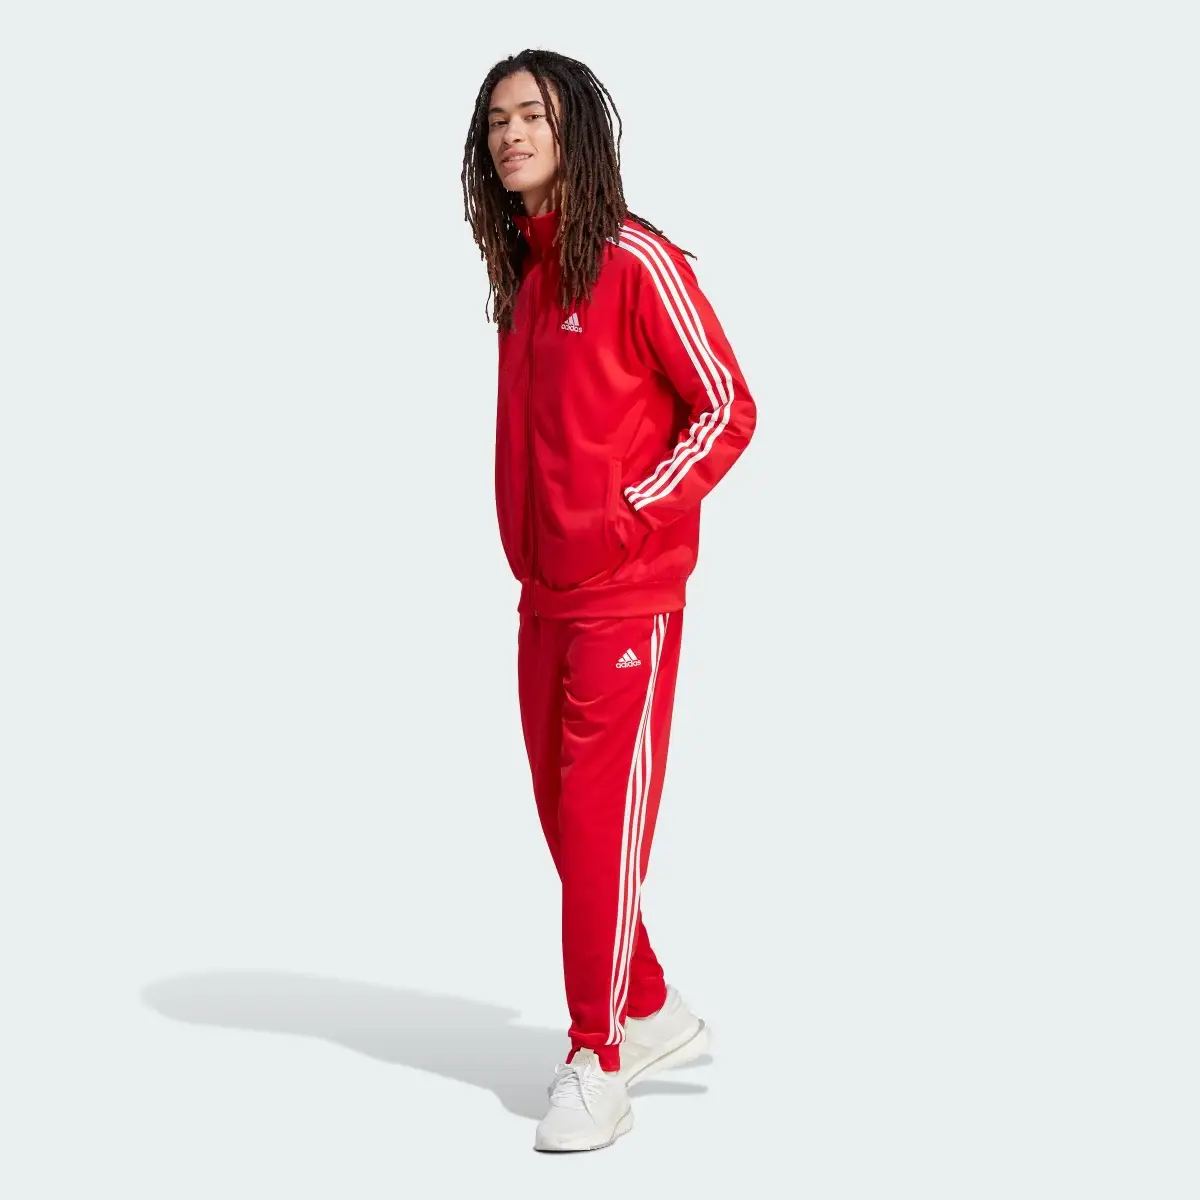 Adidas Basic 3-Stripes Tricot Track Suit. 2